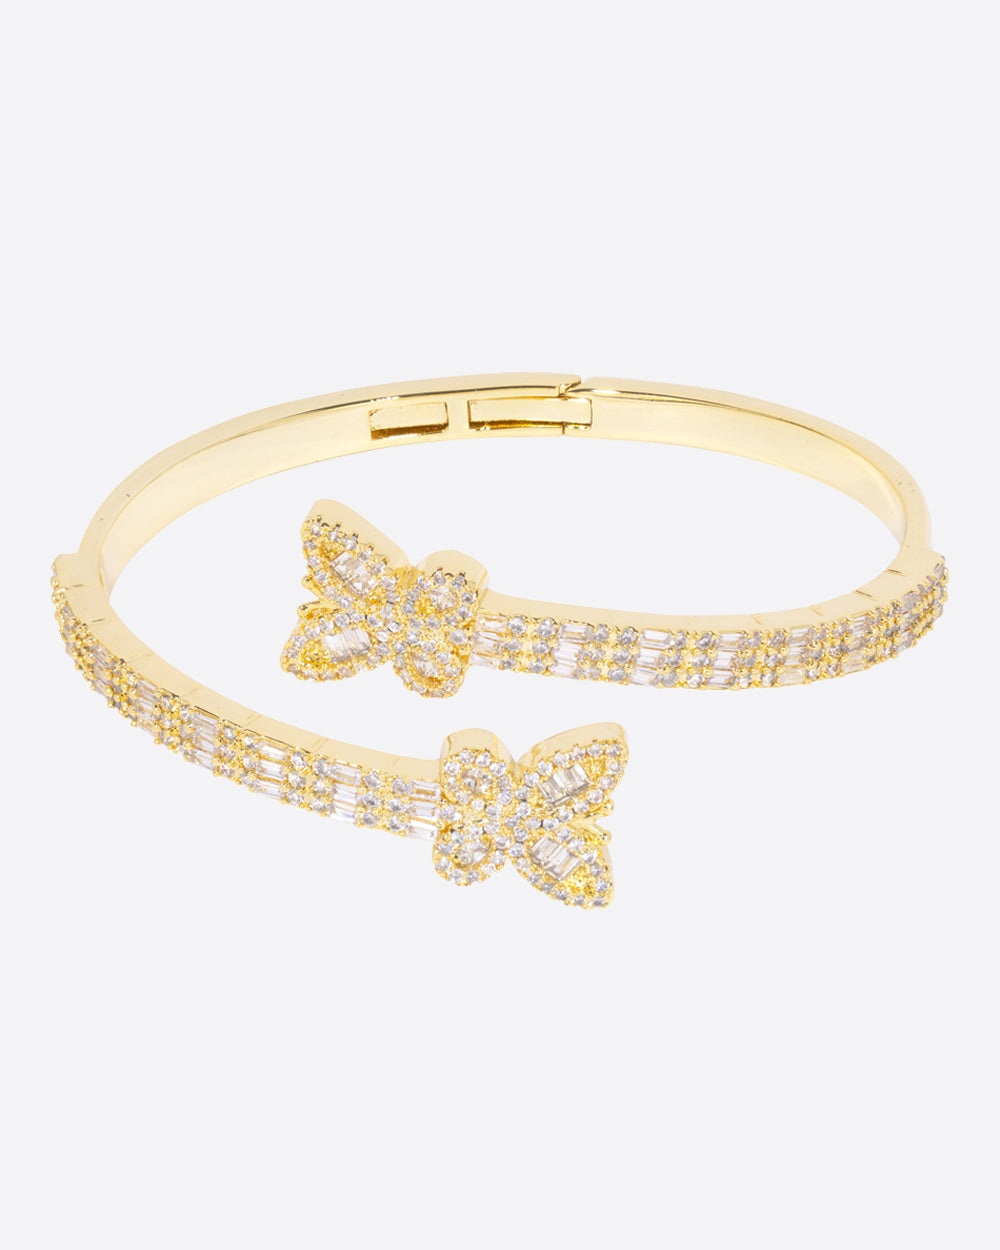 ICY BUTTERFLY BANGLE. - 18K GOLD